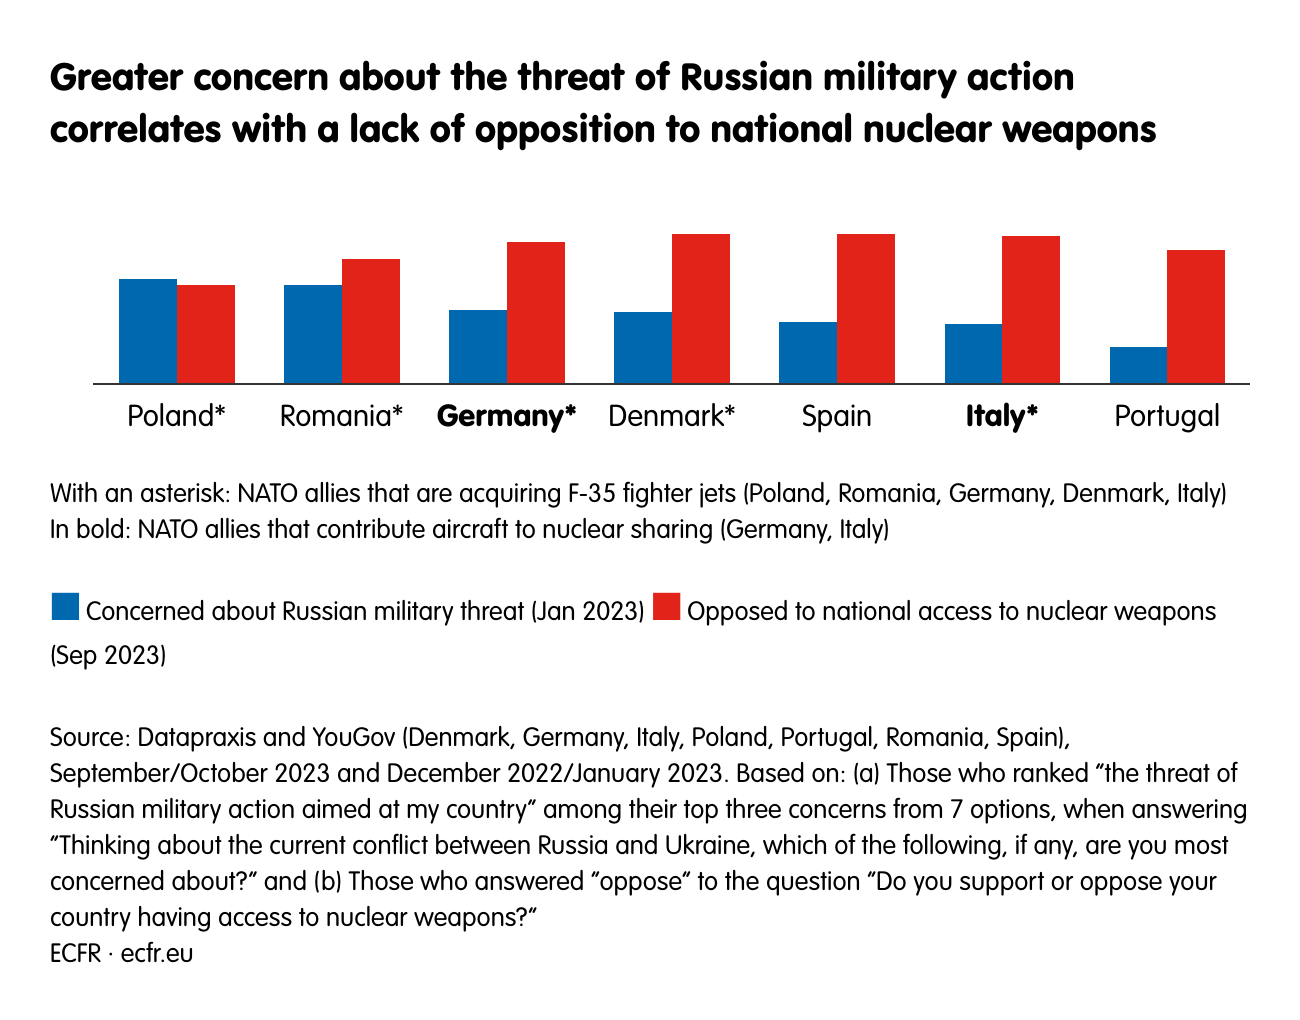 Greater concern about the threat of Russian military action correlates with a lack of opposition to national nuclear weapons